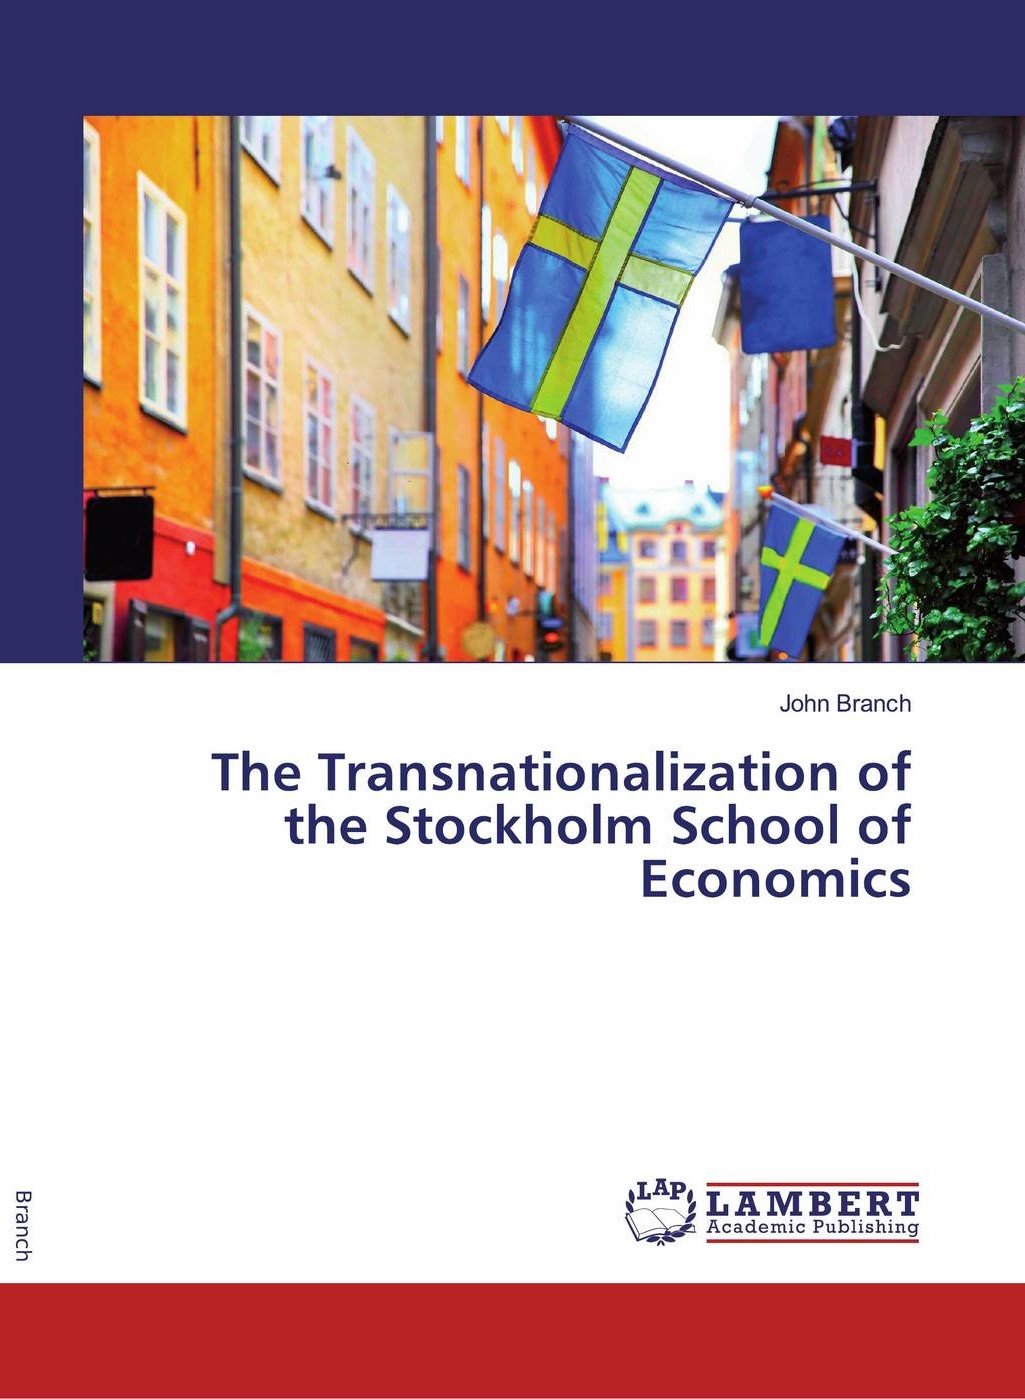 The Transnationalization of the Stockholm School of Economics